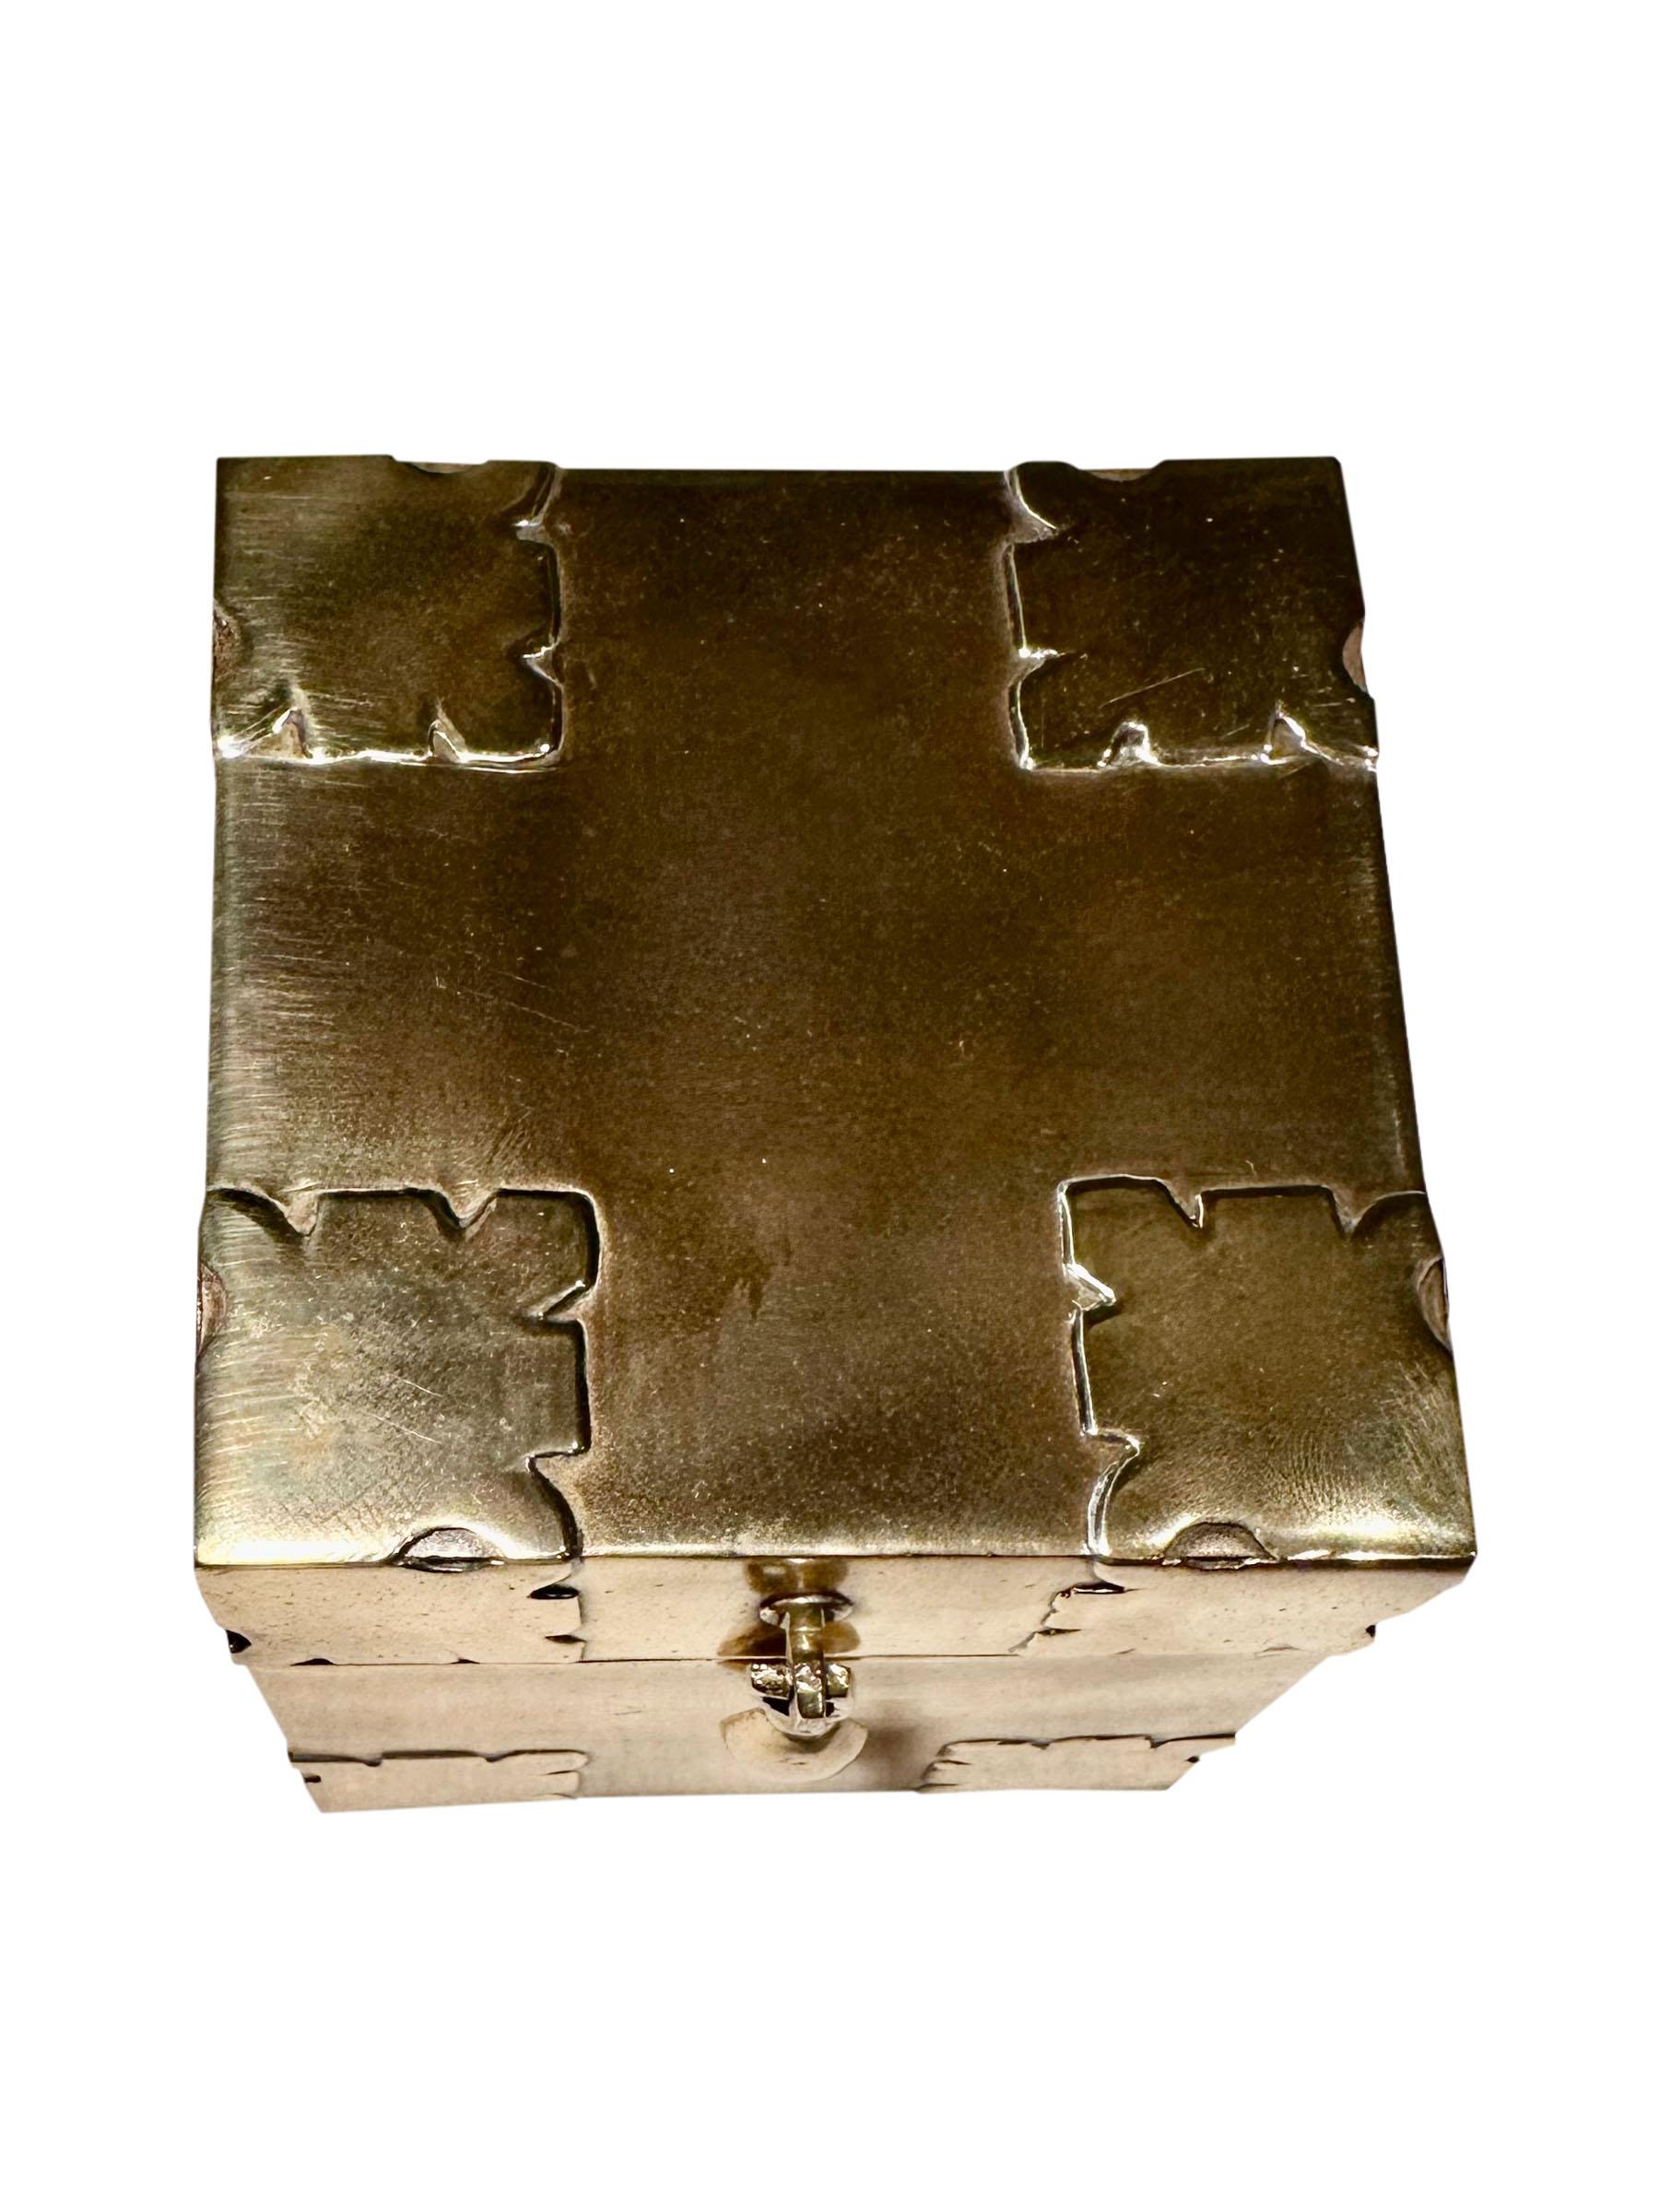 A wonderfully design in this decorative 1970s Italian brass storage box. Hinged top and clasp front closure. The interior depth is two and one half inches.